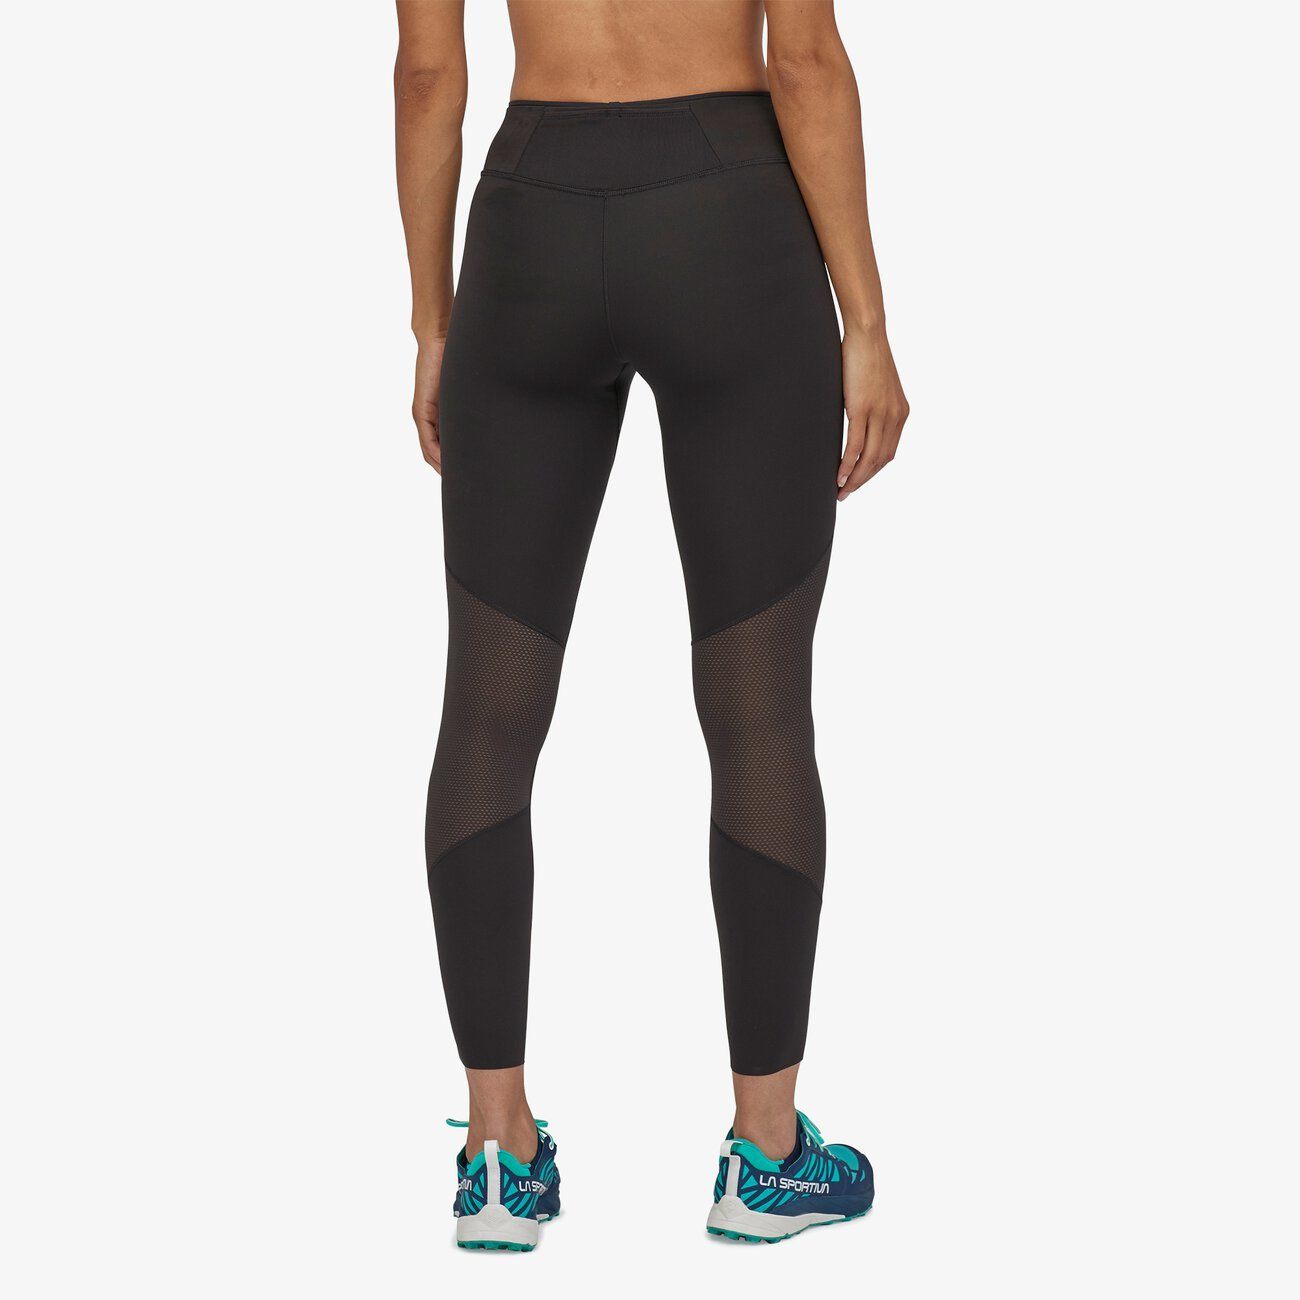 Patagonia W's Endless Run Tights - Recycled Polyester Black Pants